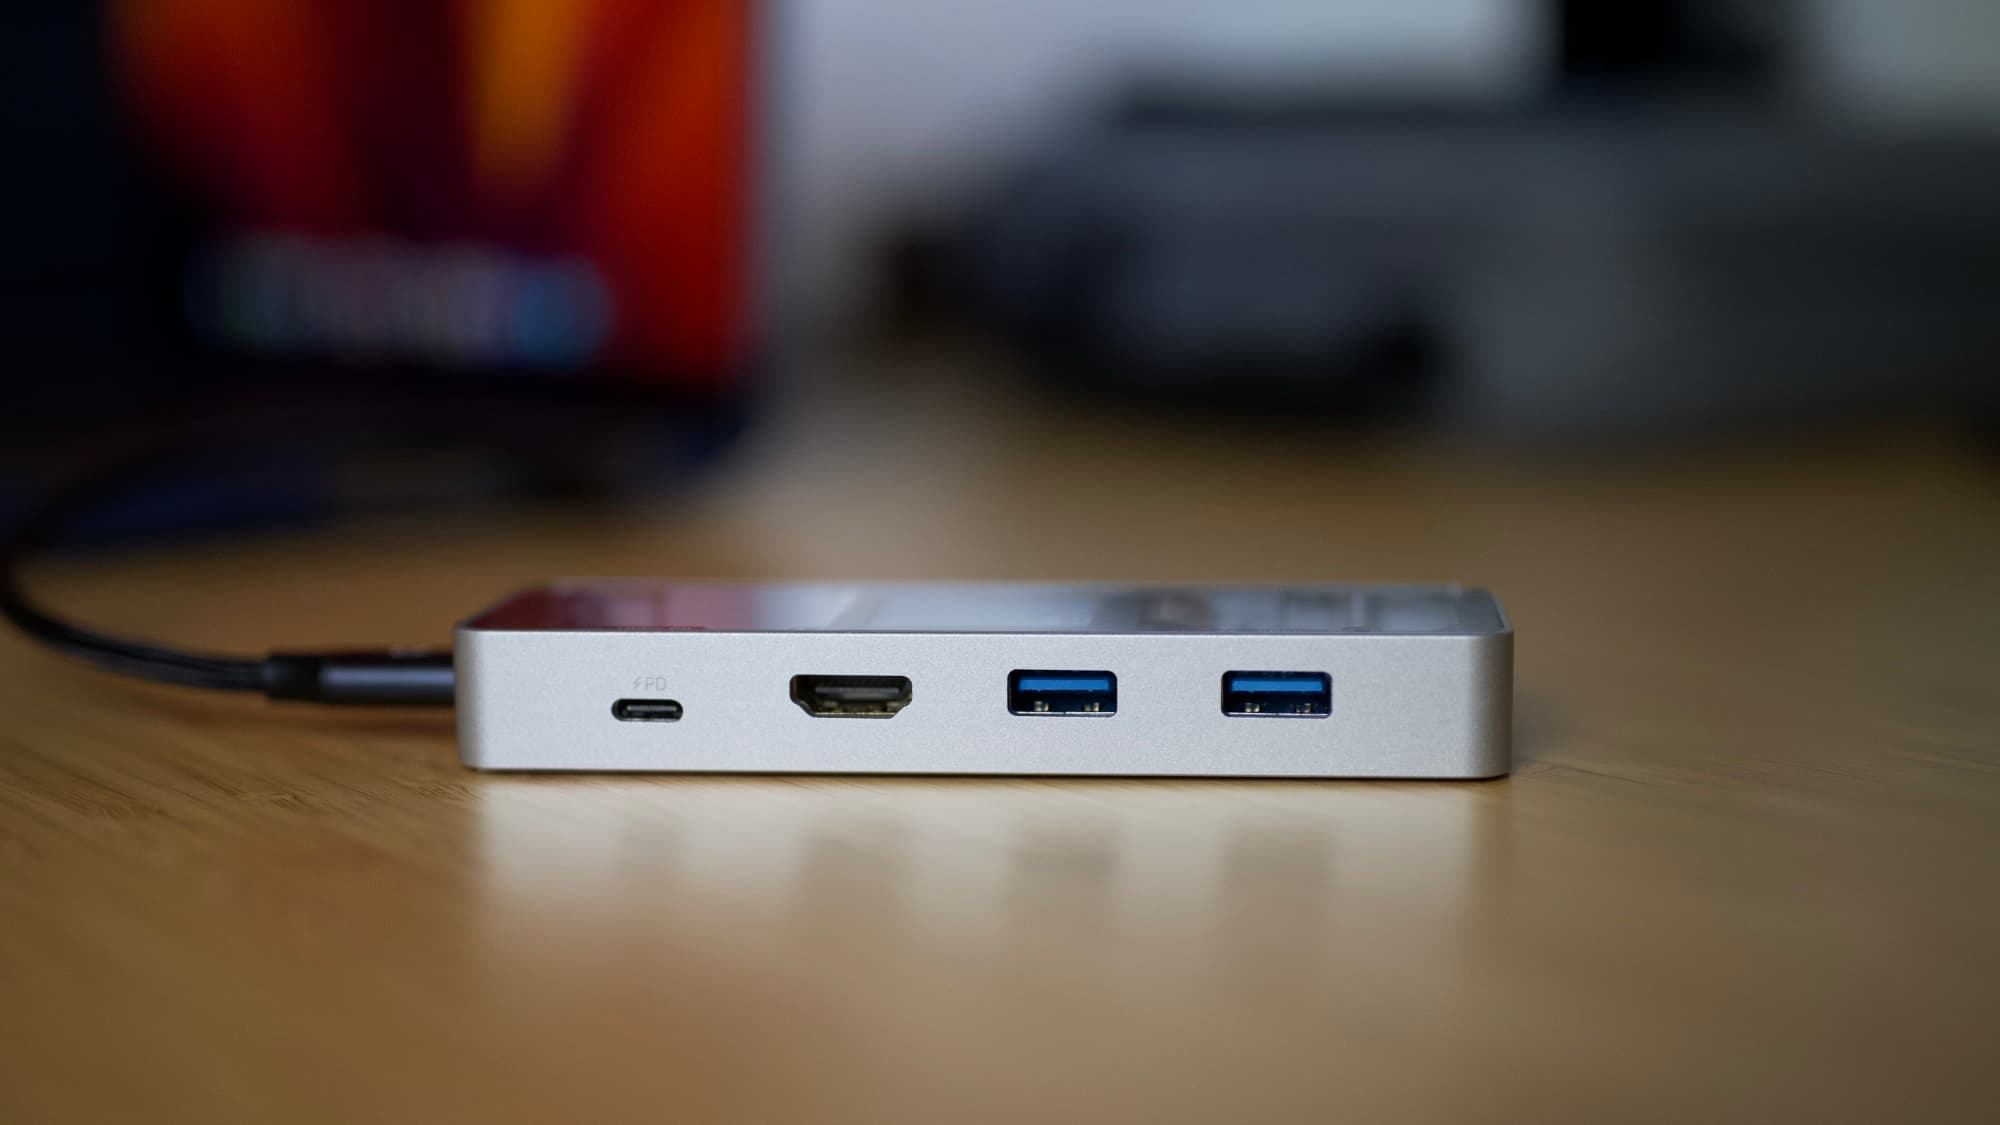 The DockCase Explorer USB-C hub expands I/O and features an informative LCD display